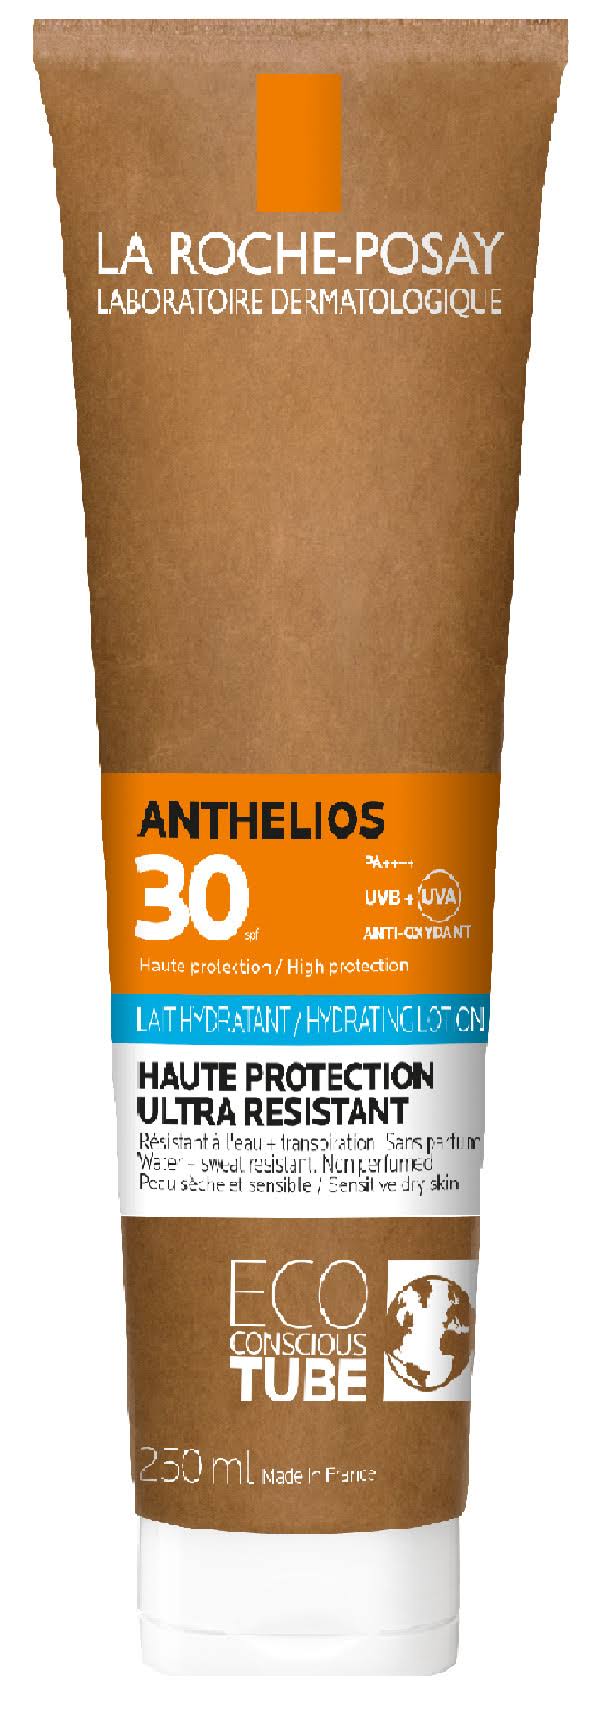 La Roche-Posay Anthelios Hydrating Lotion SPF30+ 250ml